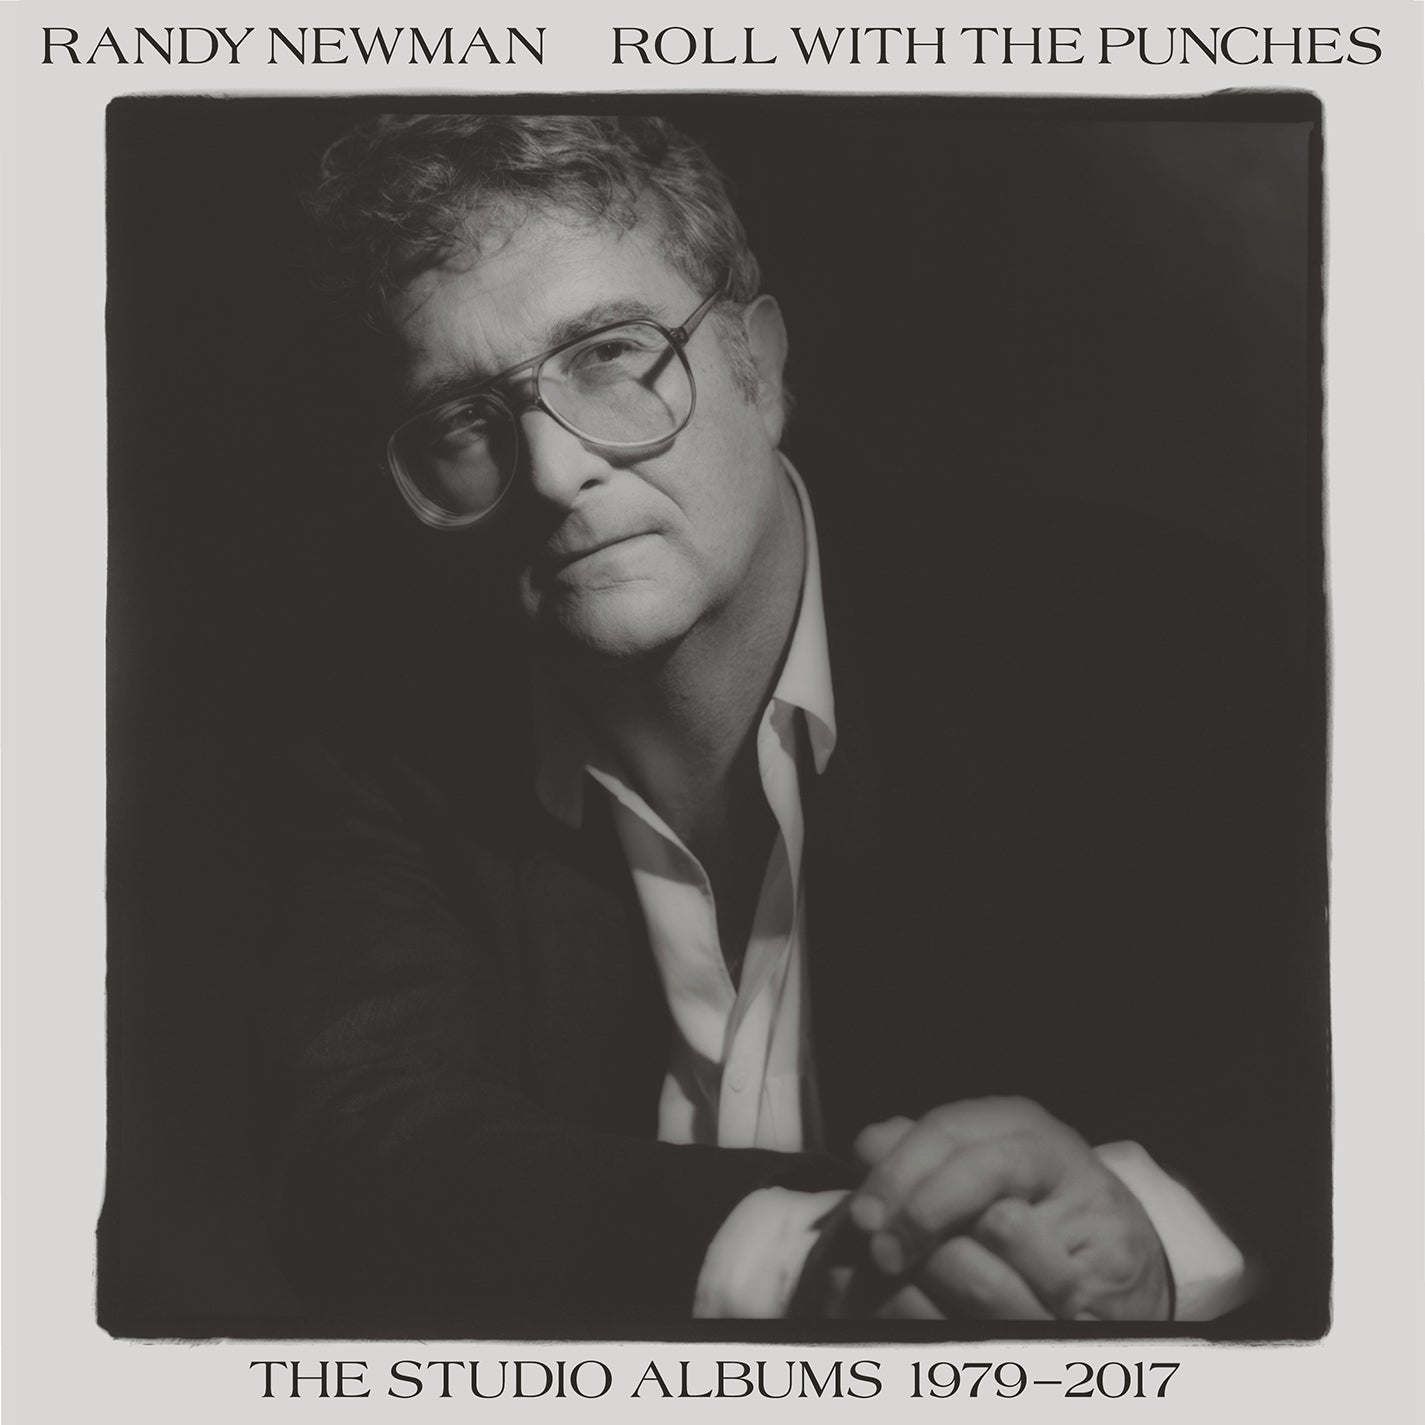 Randy Newman - Roll With the Punches 1979-2017 RSD (Vinyl 8LP)